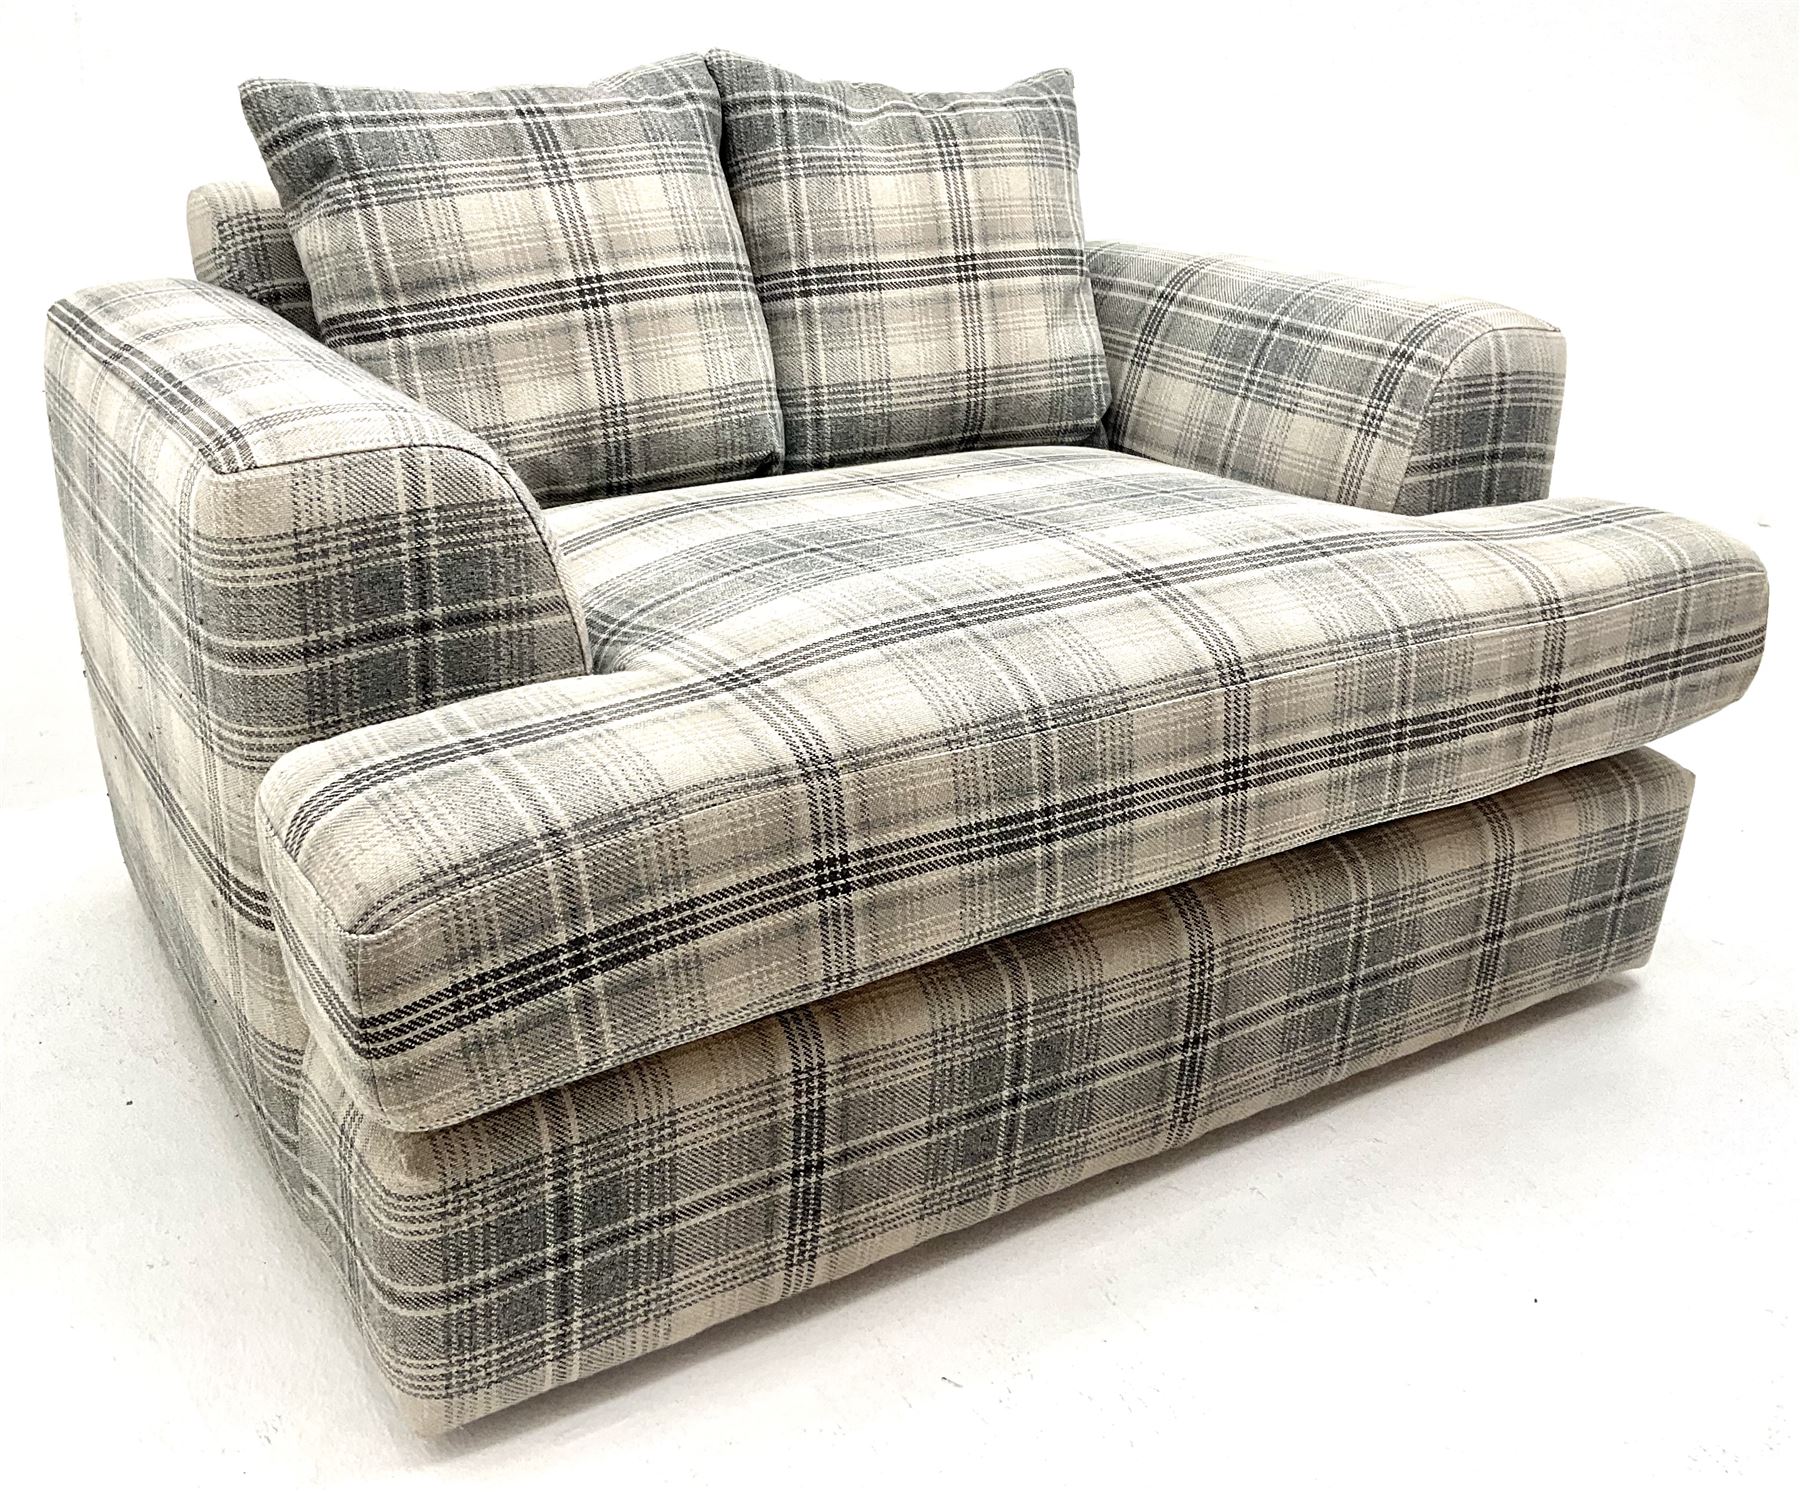 Next snuggler sofa upholstered in check fabric - Image 2 of 3